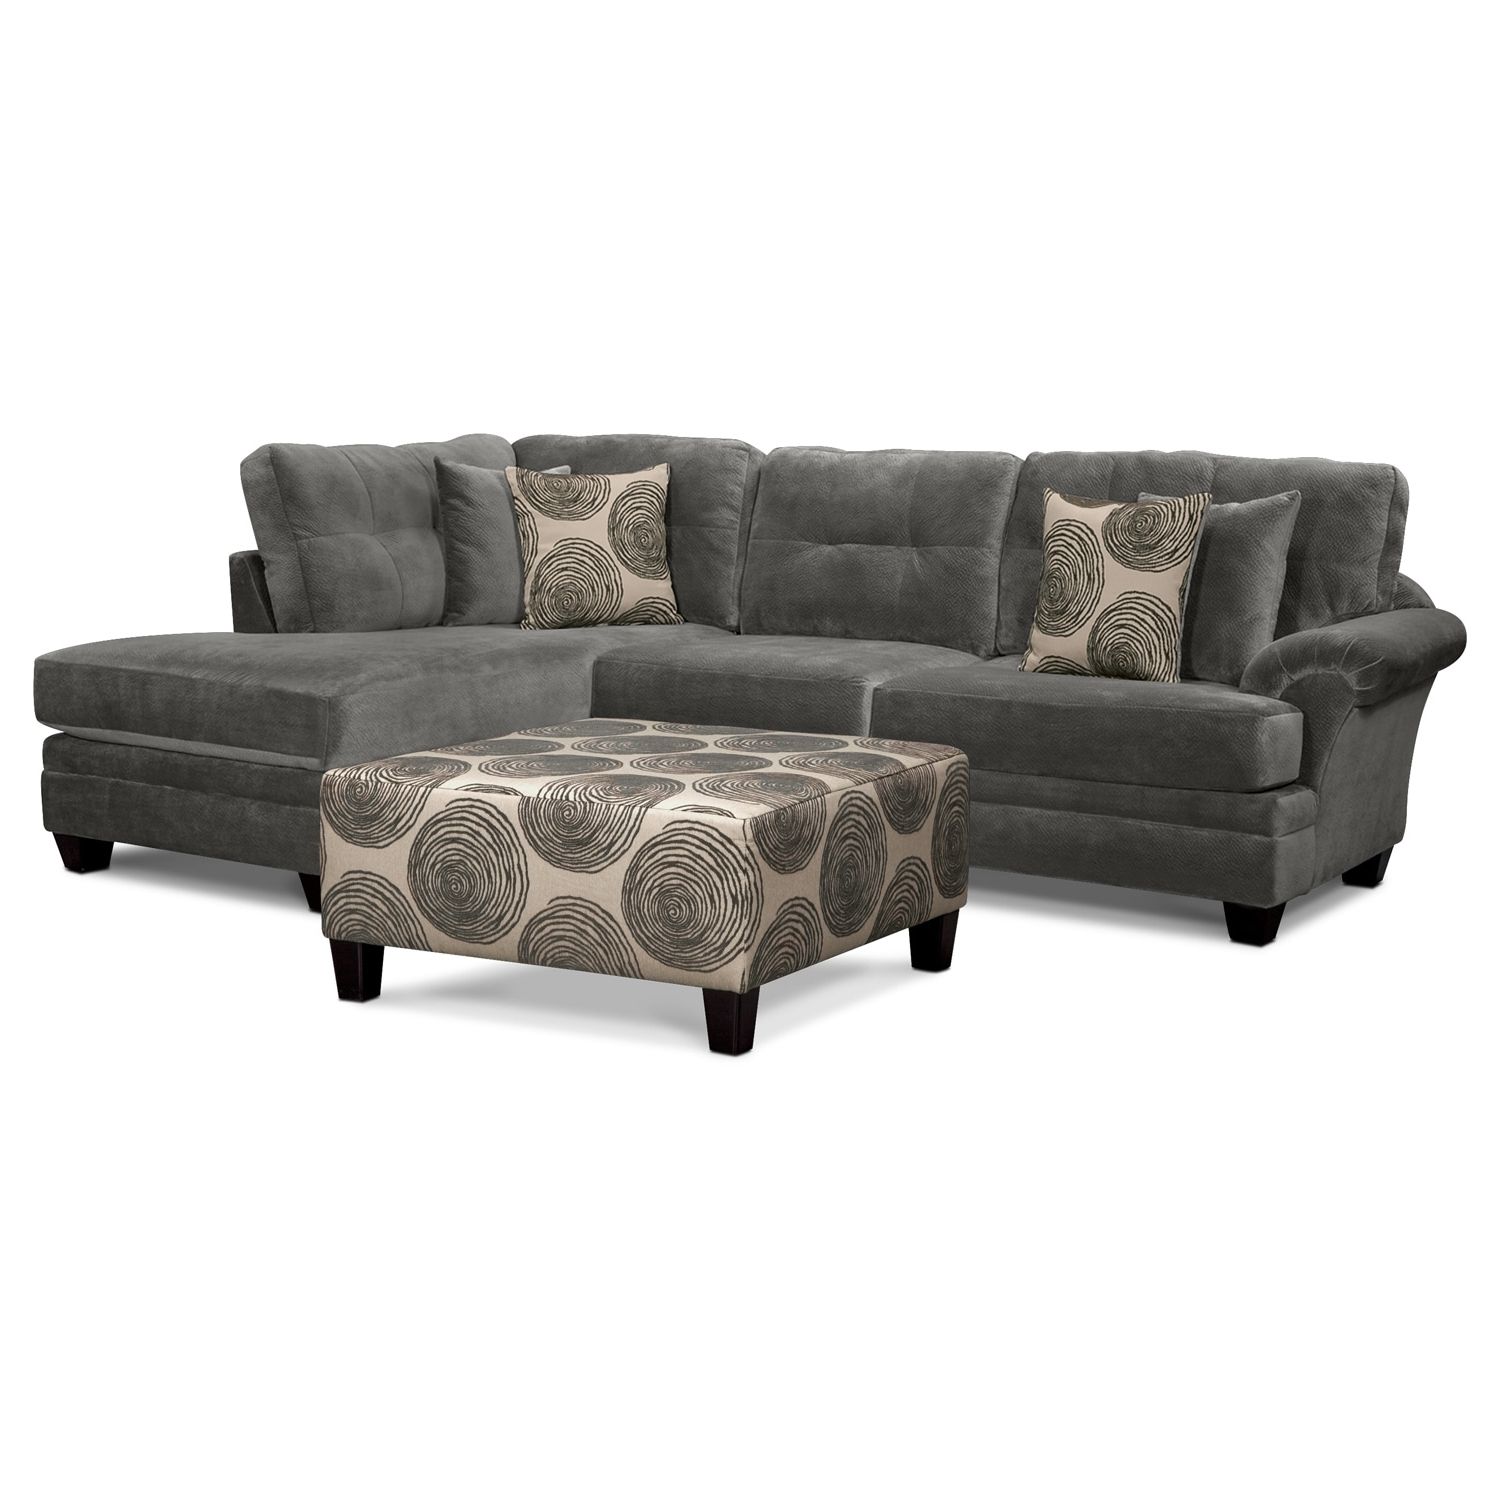 Value City Furniture For Most Up To Date Value City Sectional Sofas (View 6 of 15)